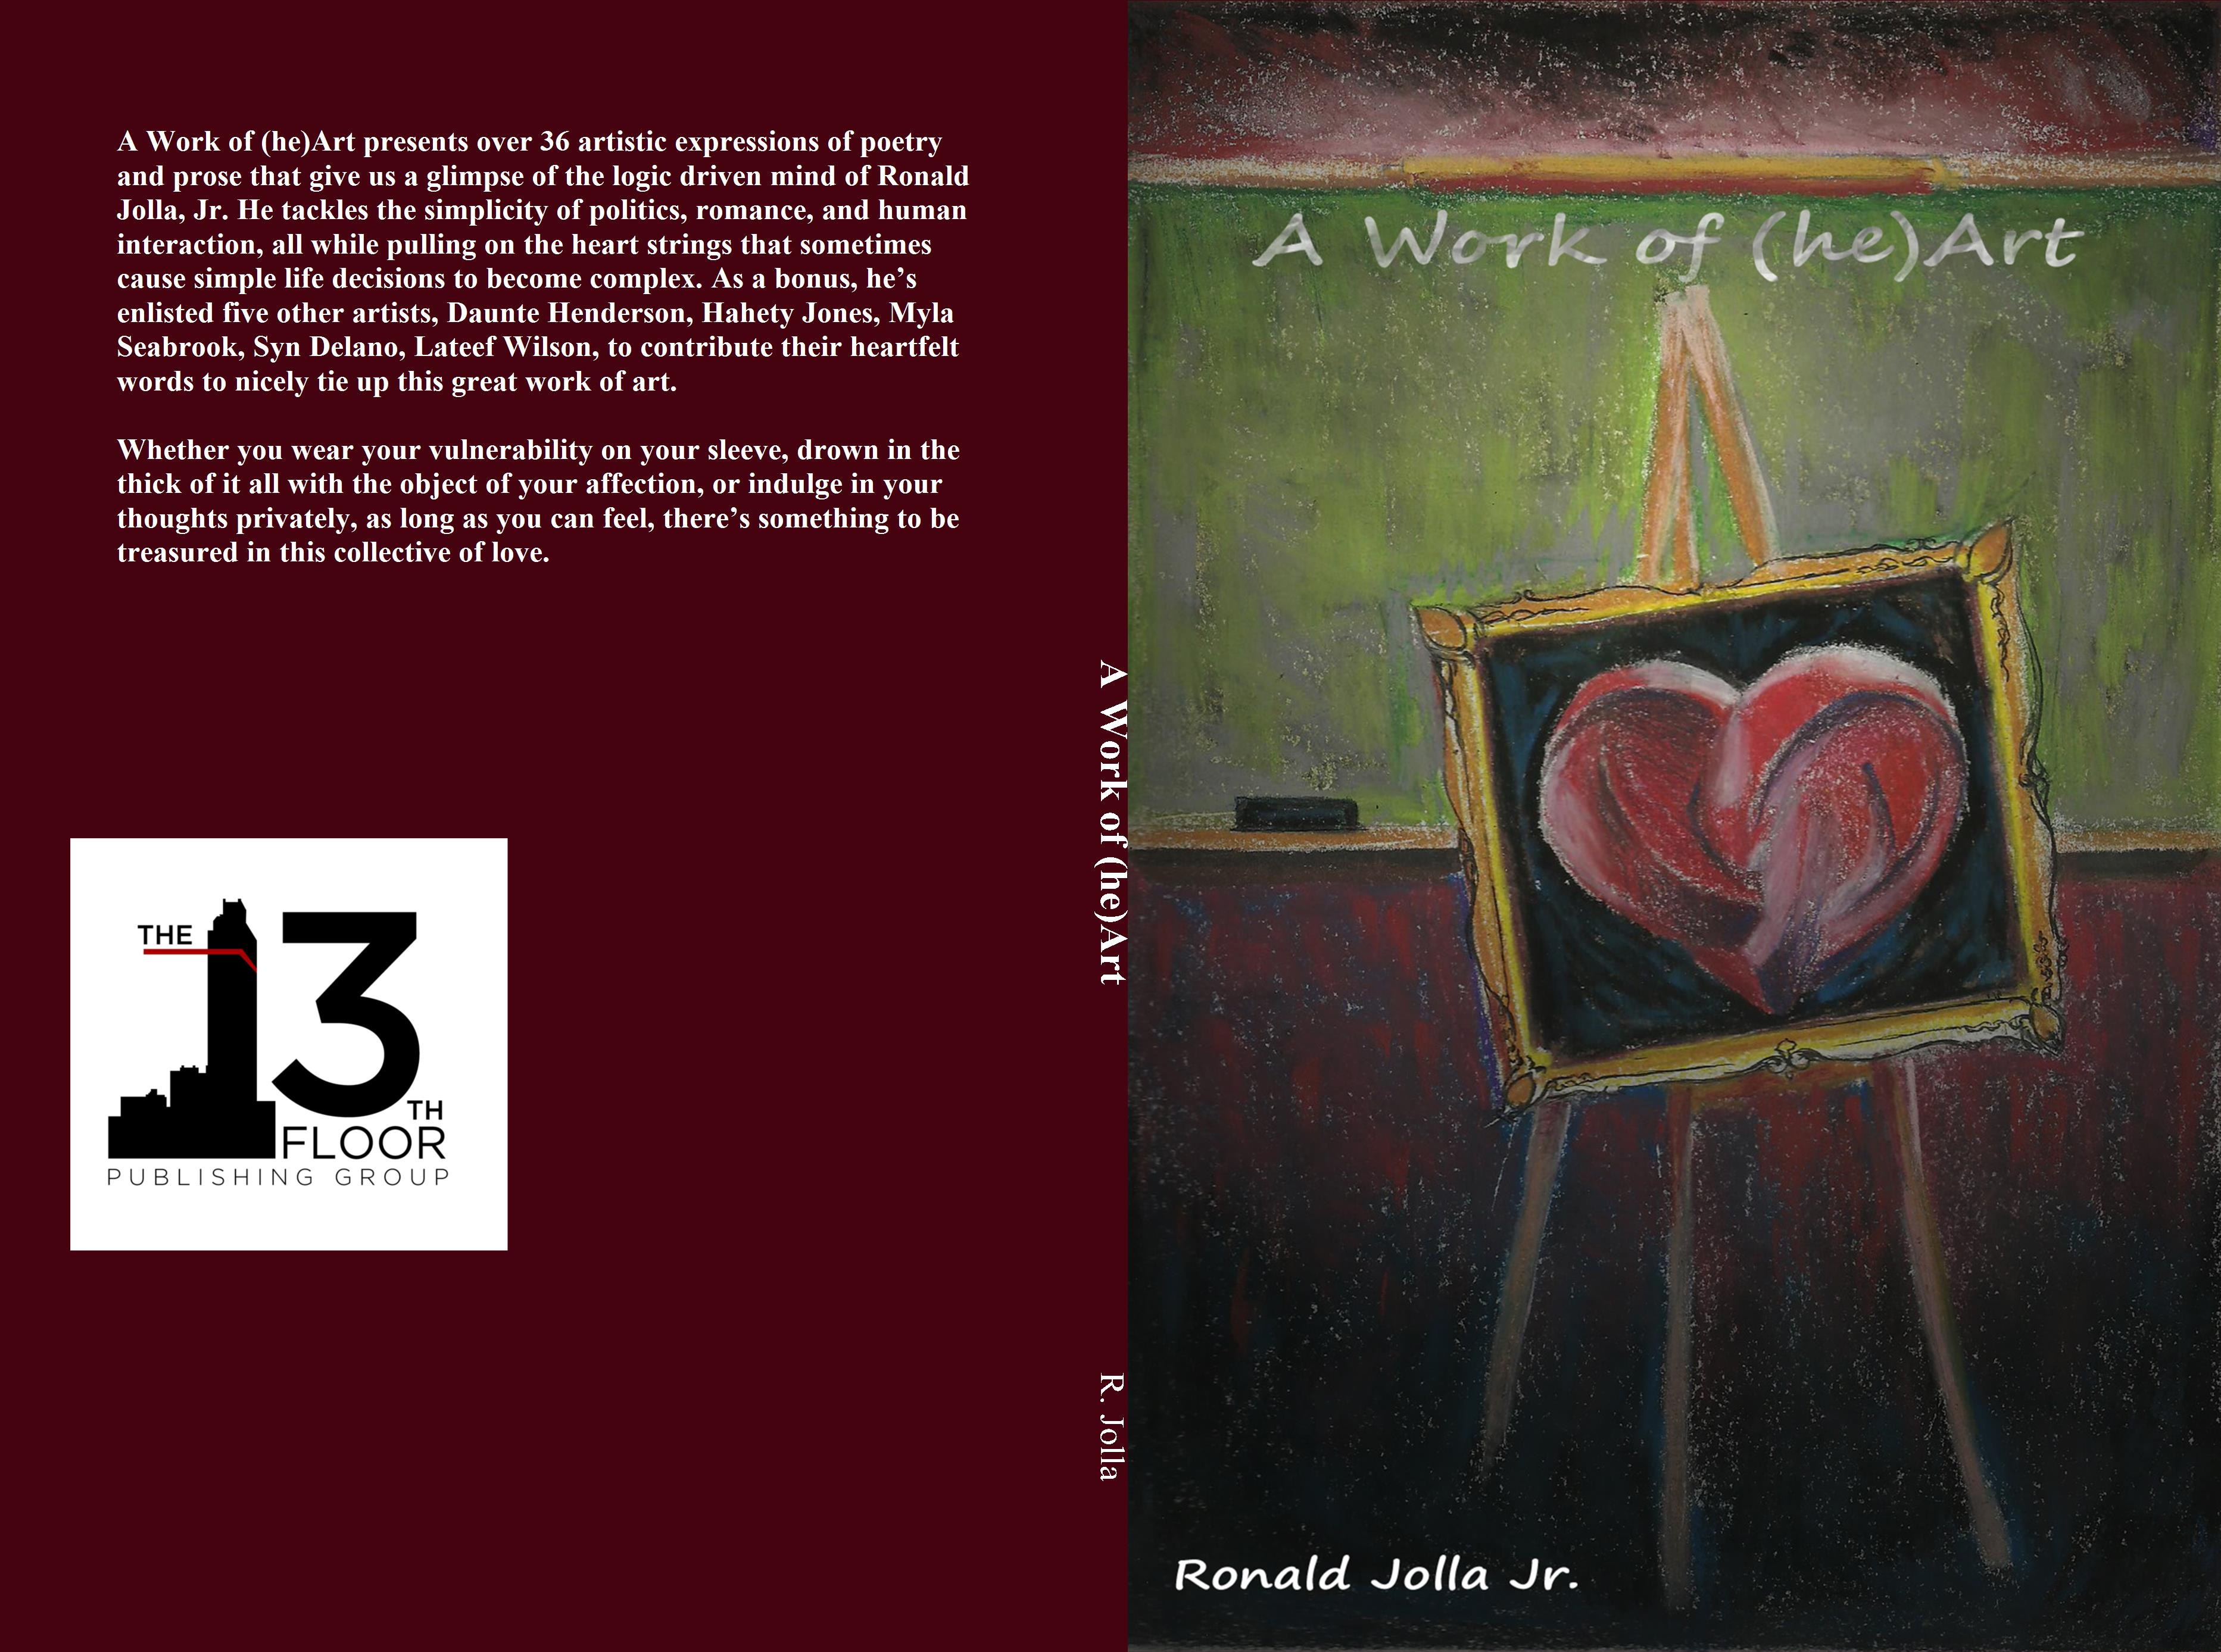 A Work of (he)Art cover image